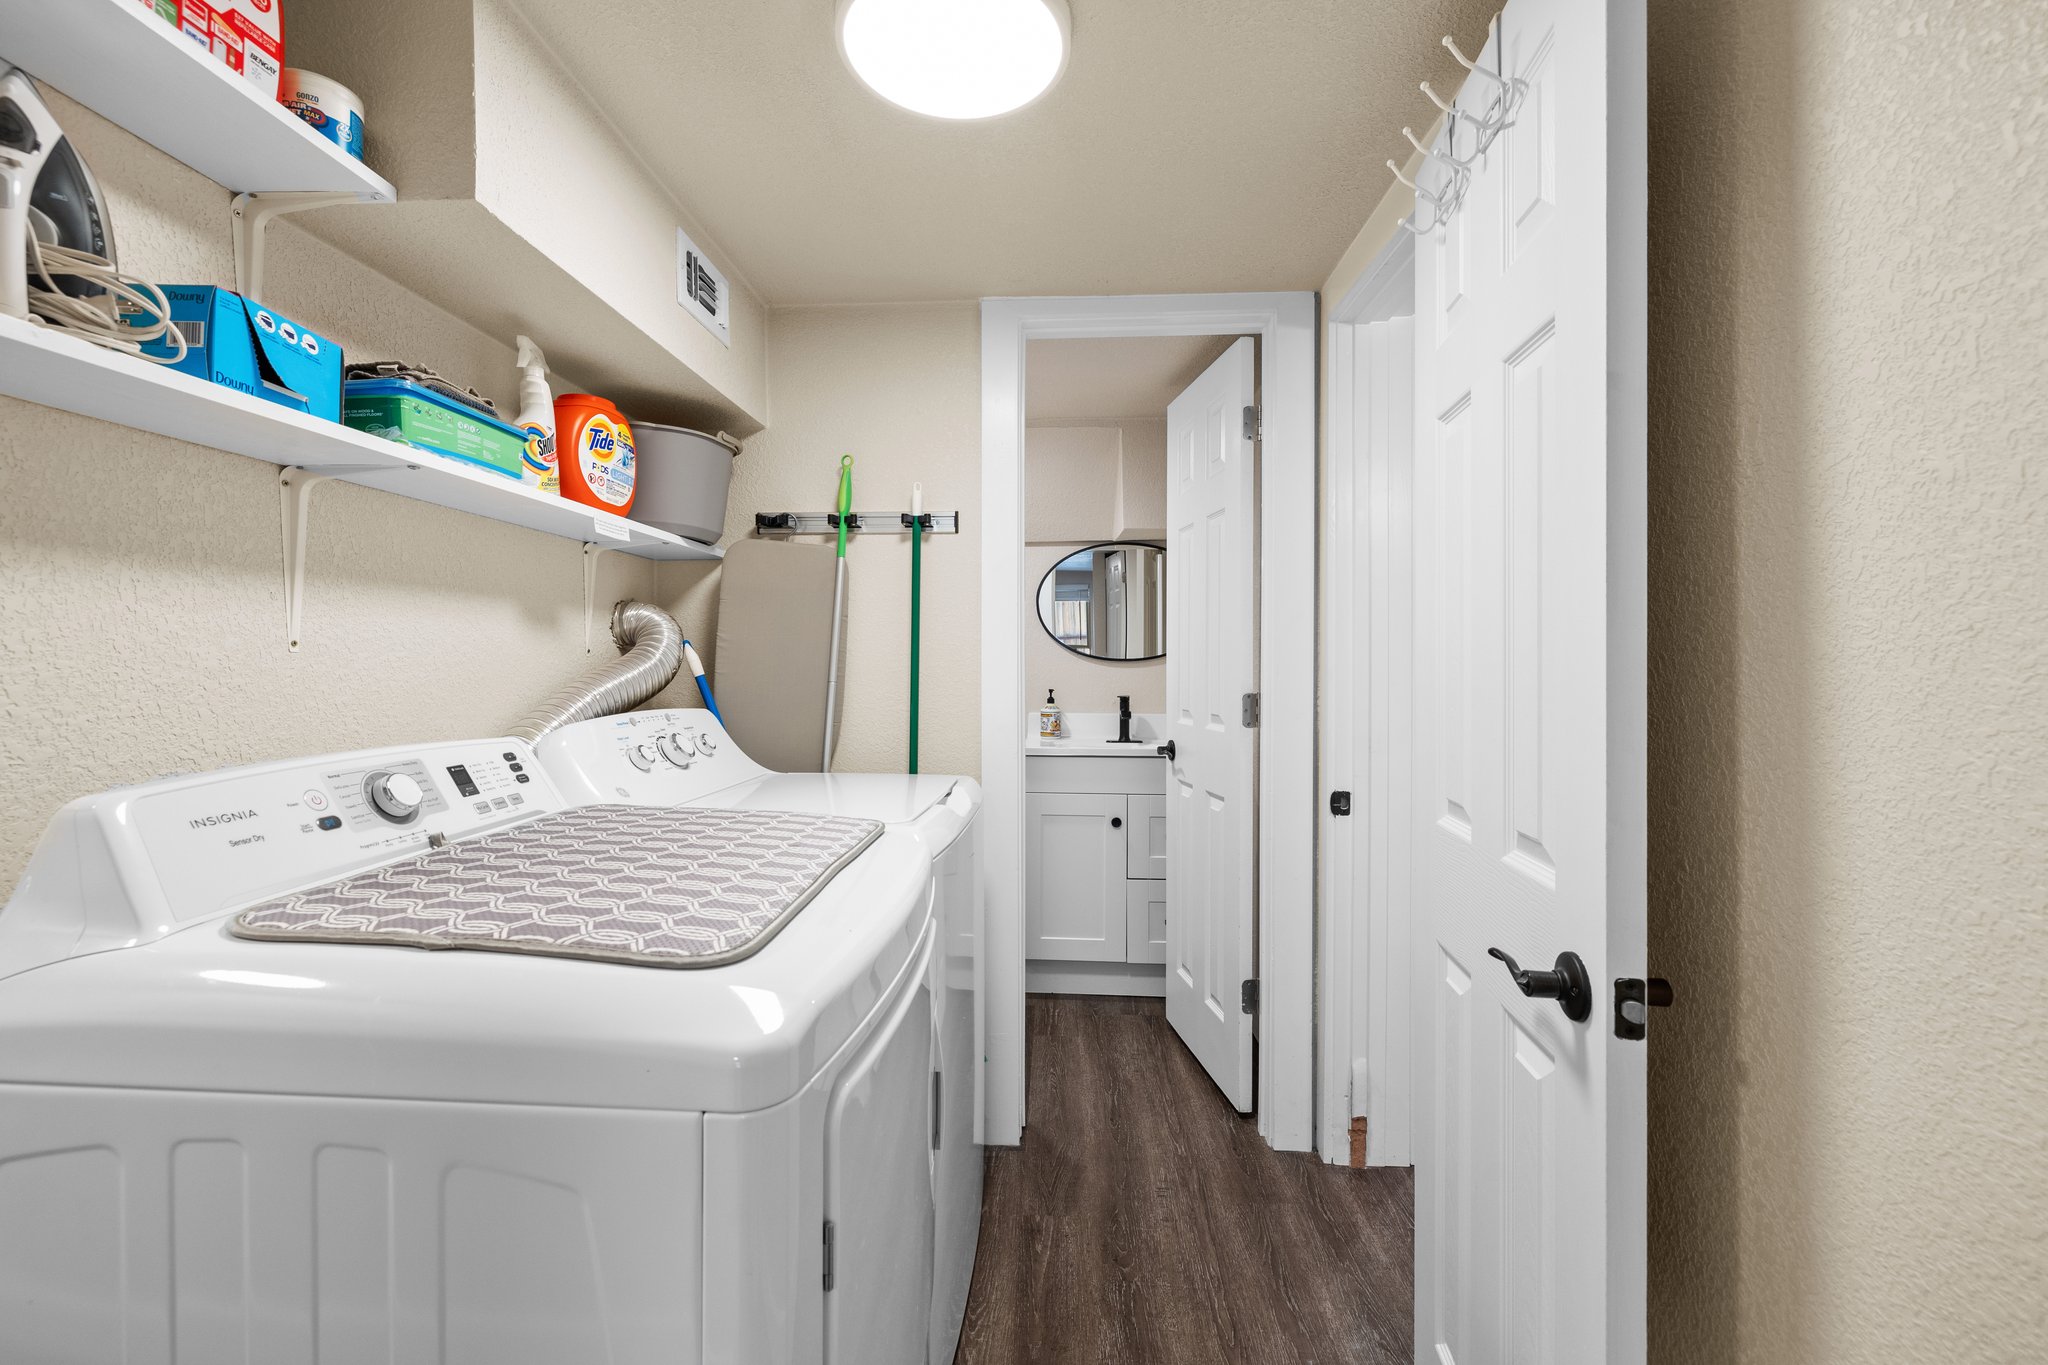 This is the laundry area in the 2BR house that's near both bathrooms.